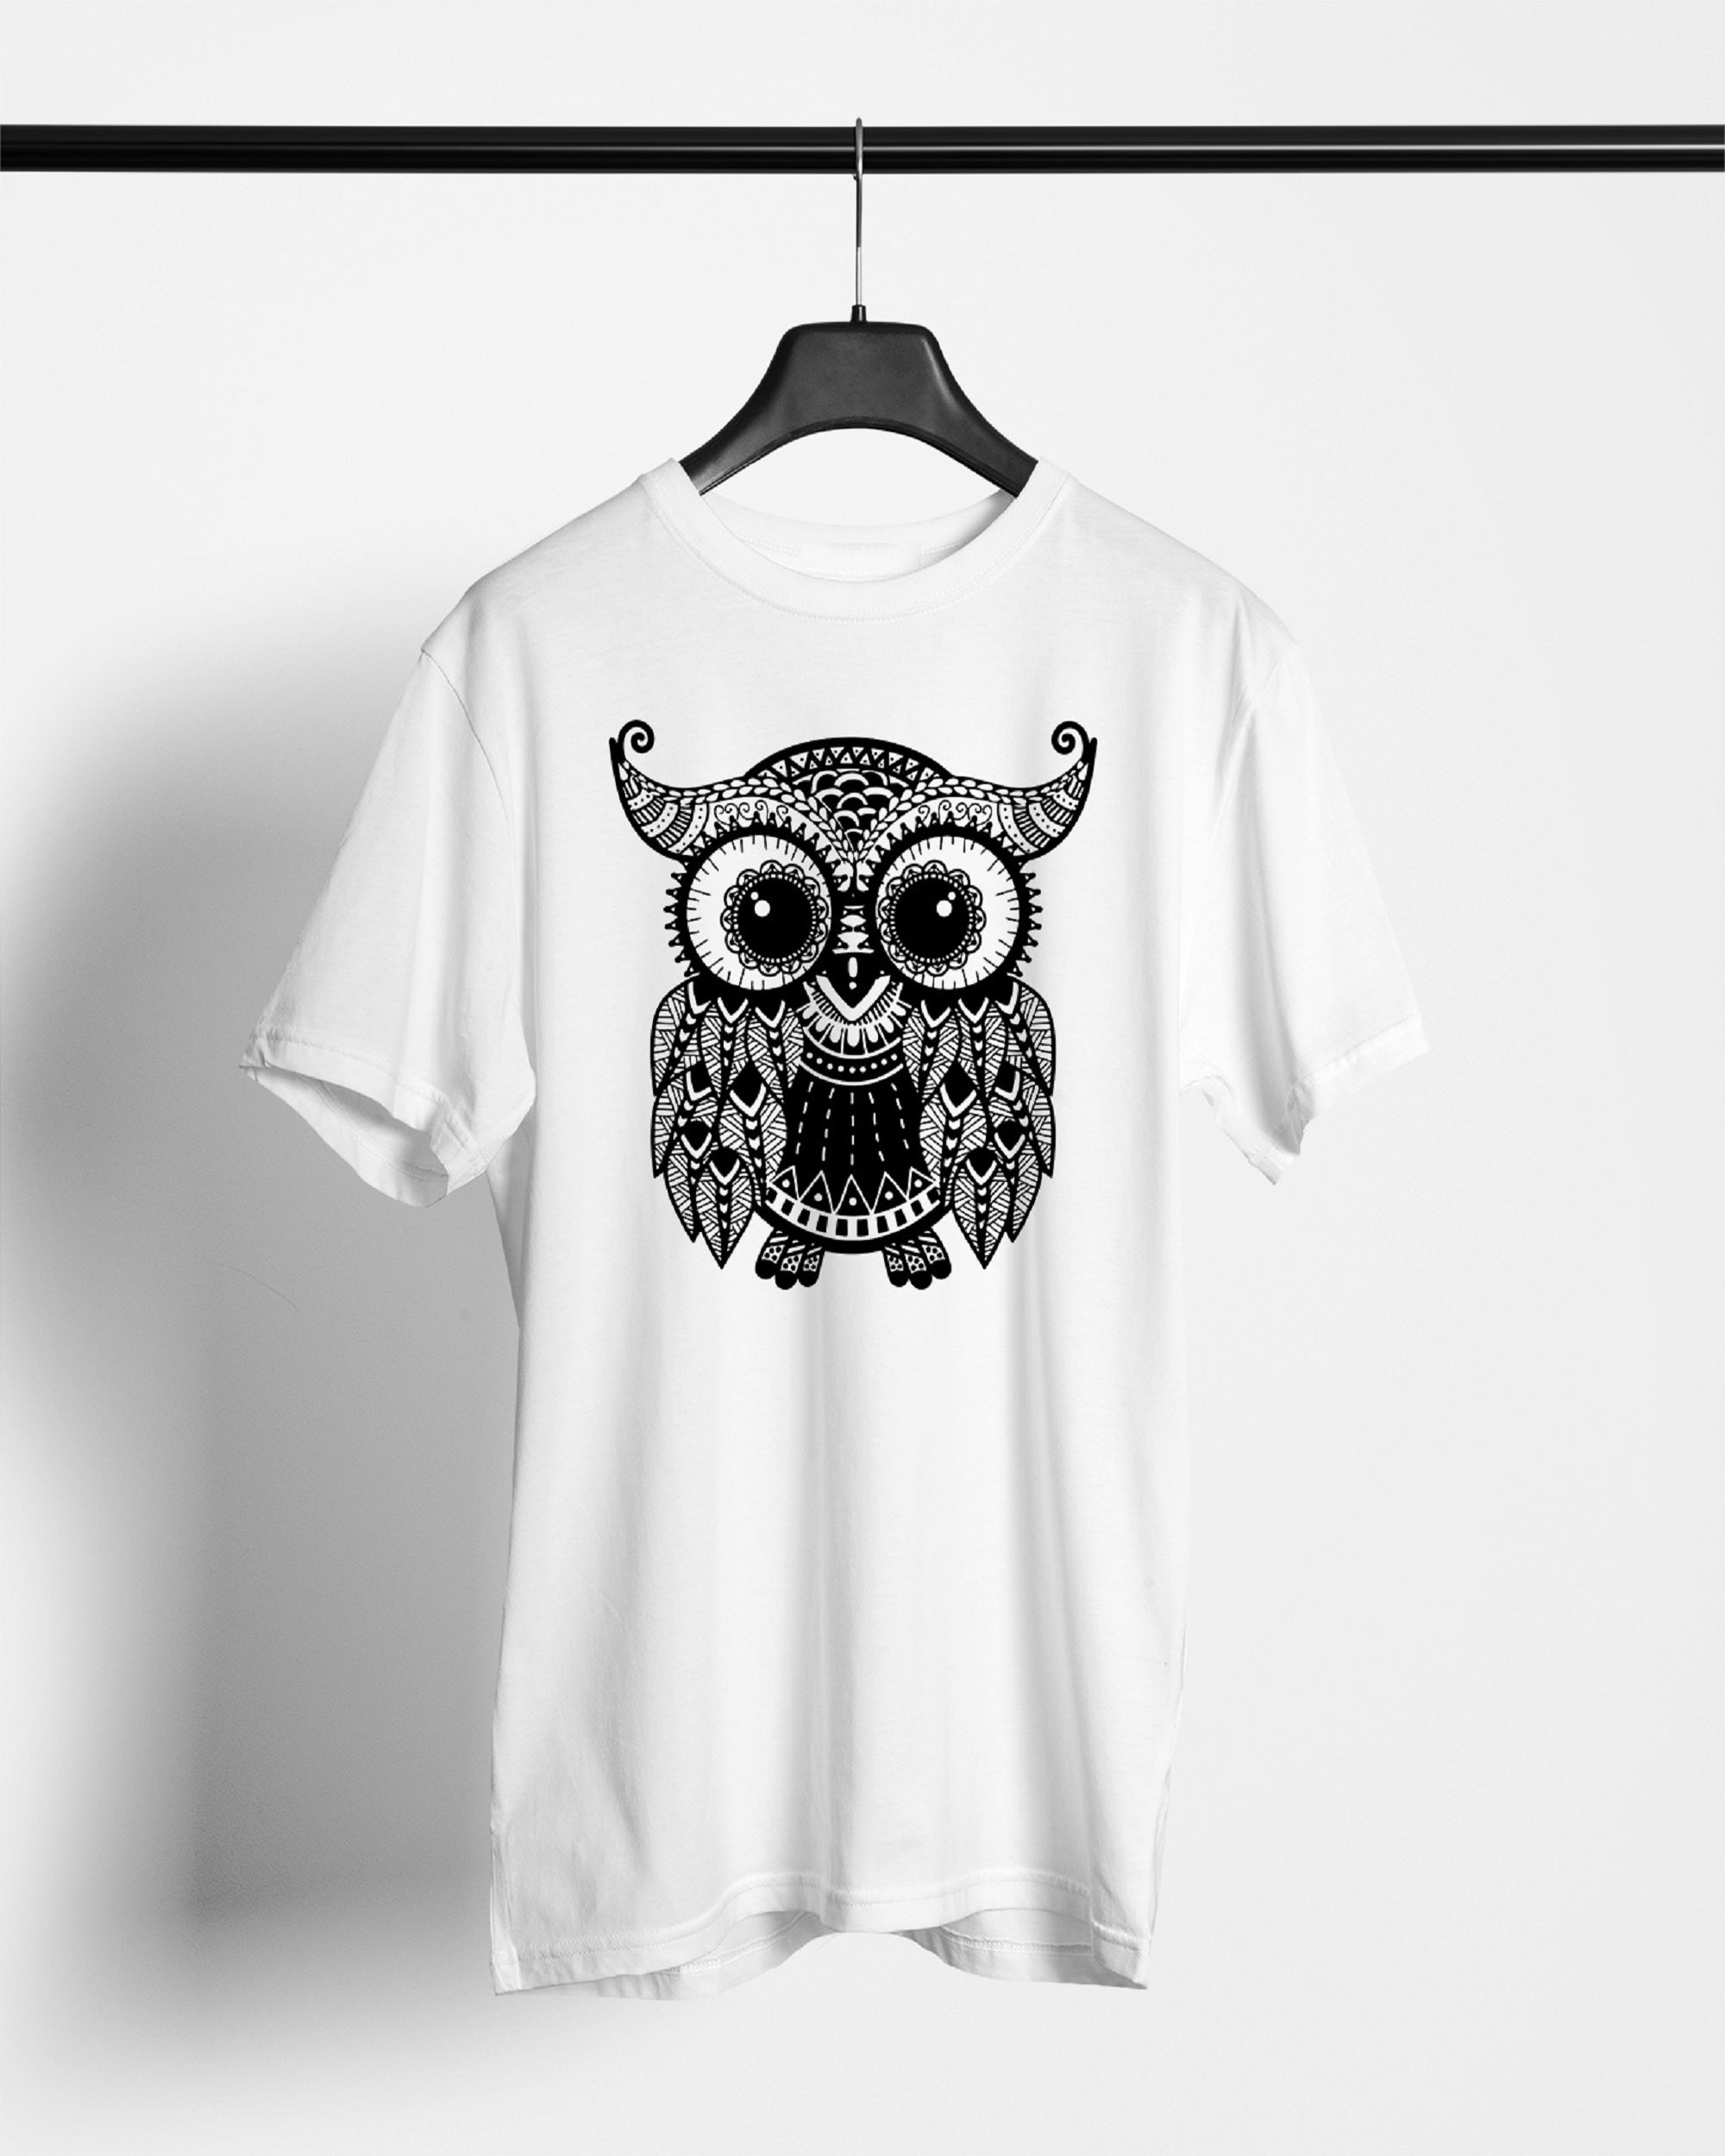 Baby Owl T-Shirts For Men || White || Stylish Tshirts || 100% Cotton || Best T-Shirt For Men's